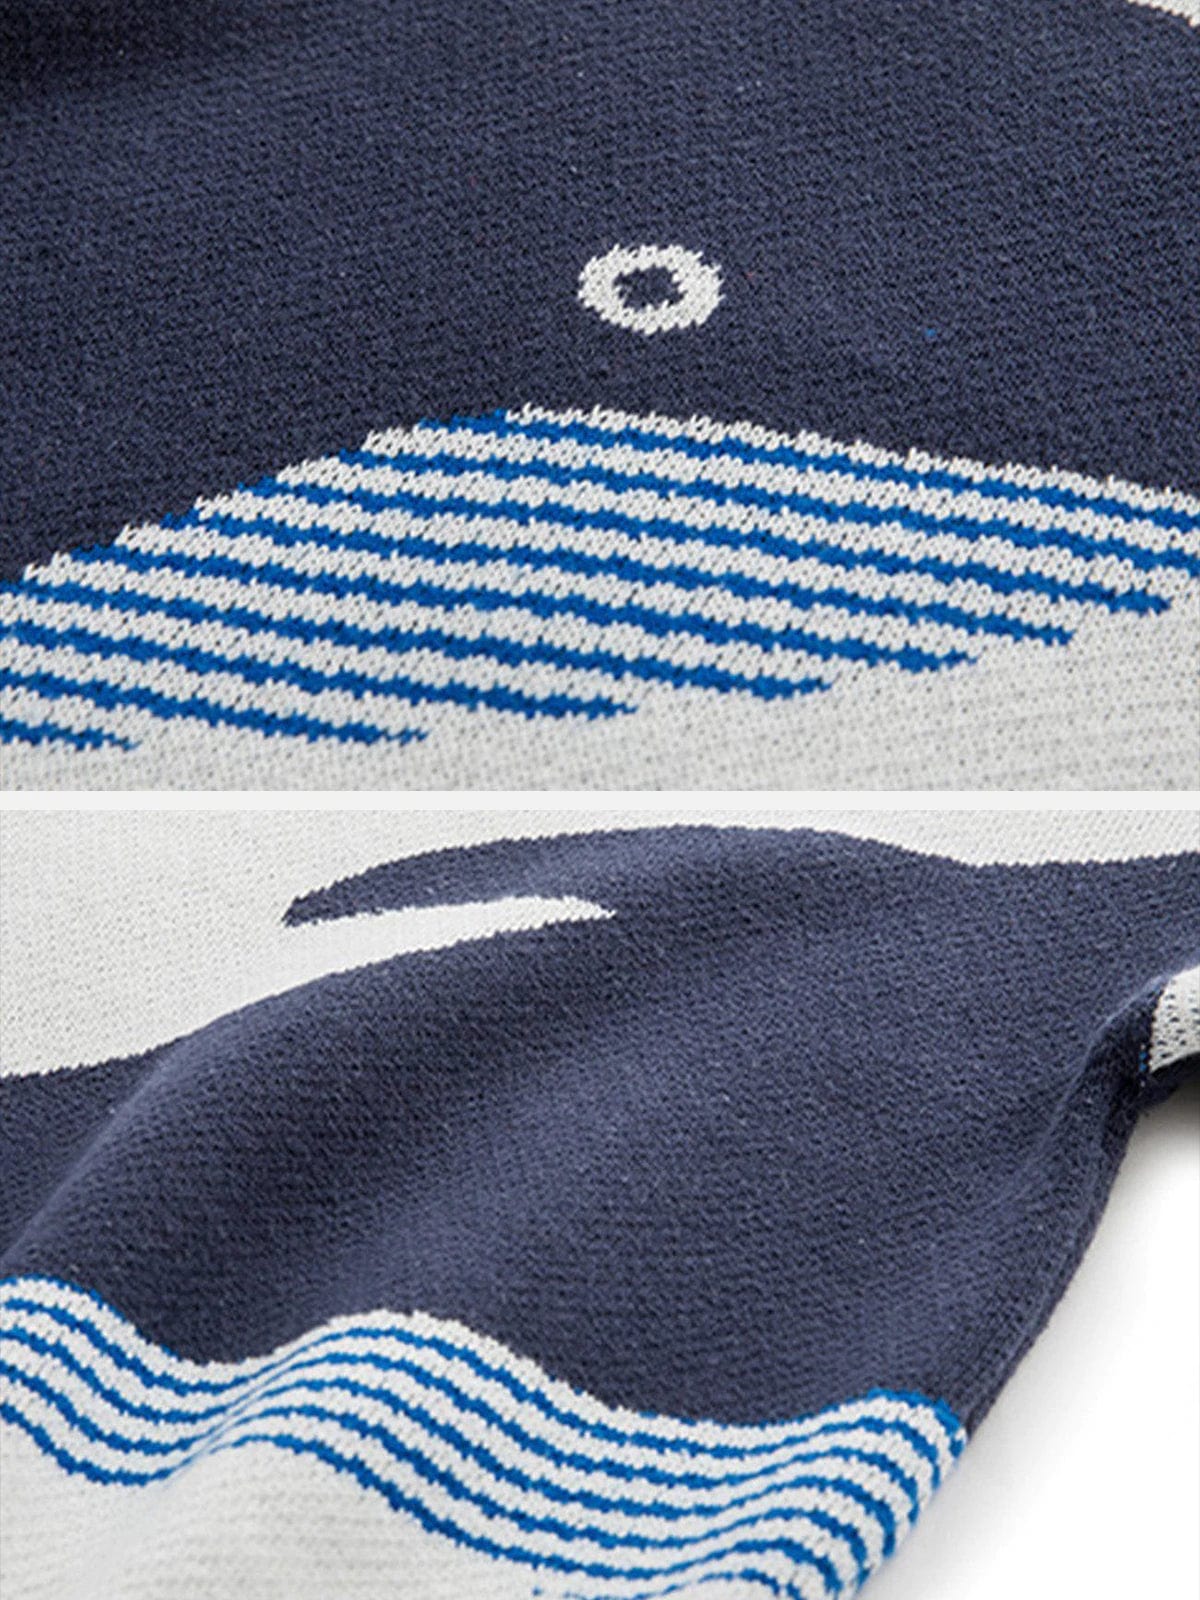 Whale Print Knit Sweater